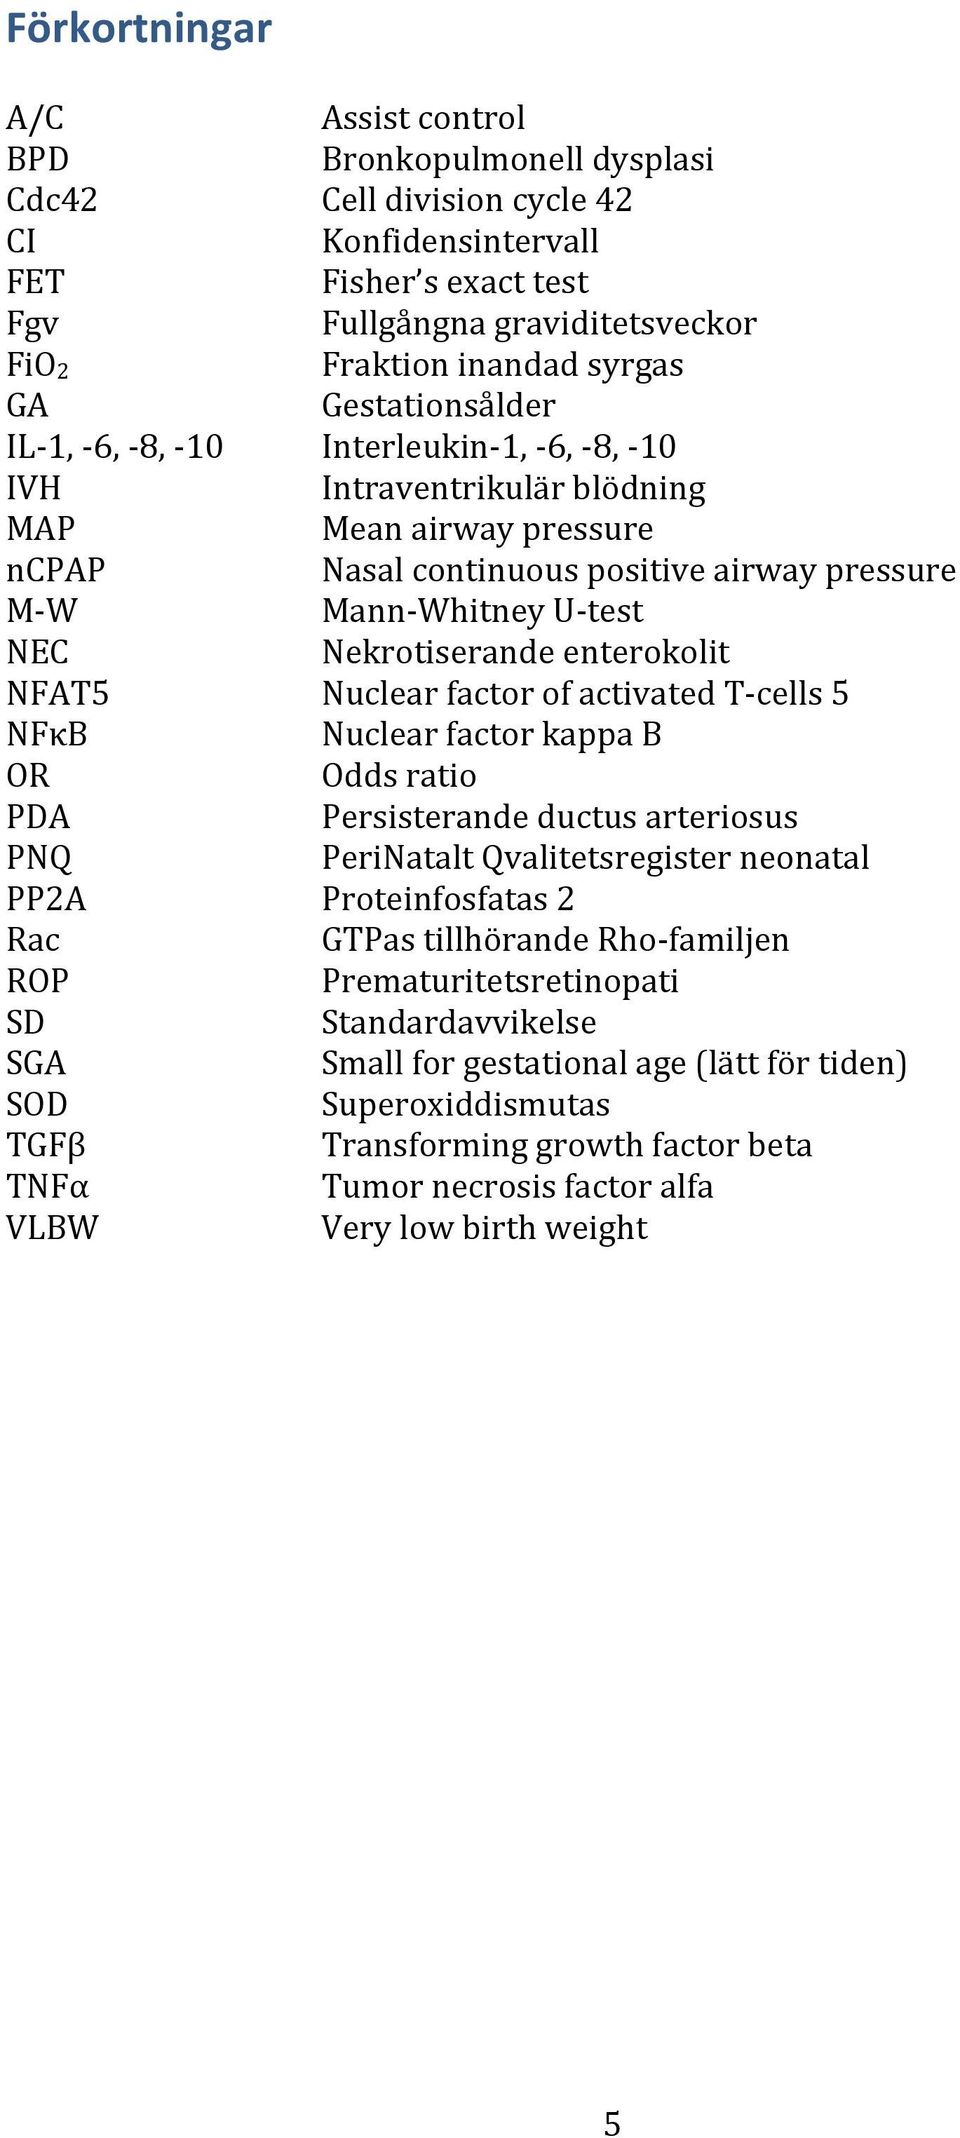 pressure Nasal continuous positive airway pressure Mann- Whitney U- test Nekrotiserande enterokolit Nuclear factor of activated T- cells 5 Nuclear factor kappa B Odds ratio Persisterande ductus